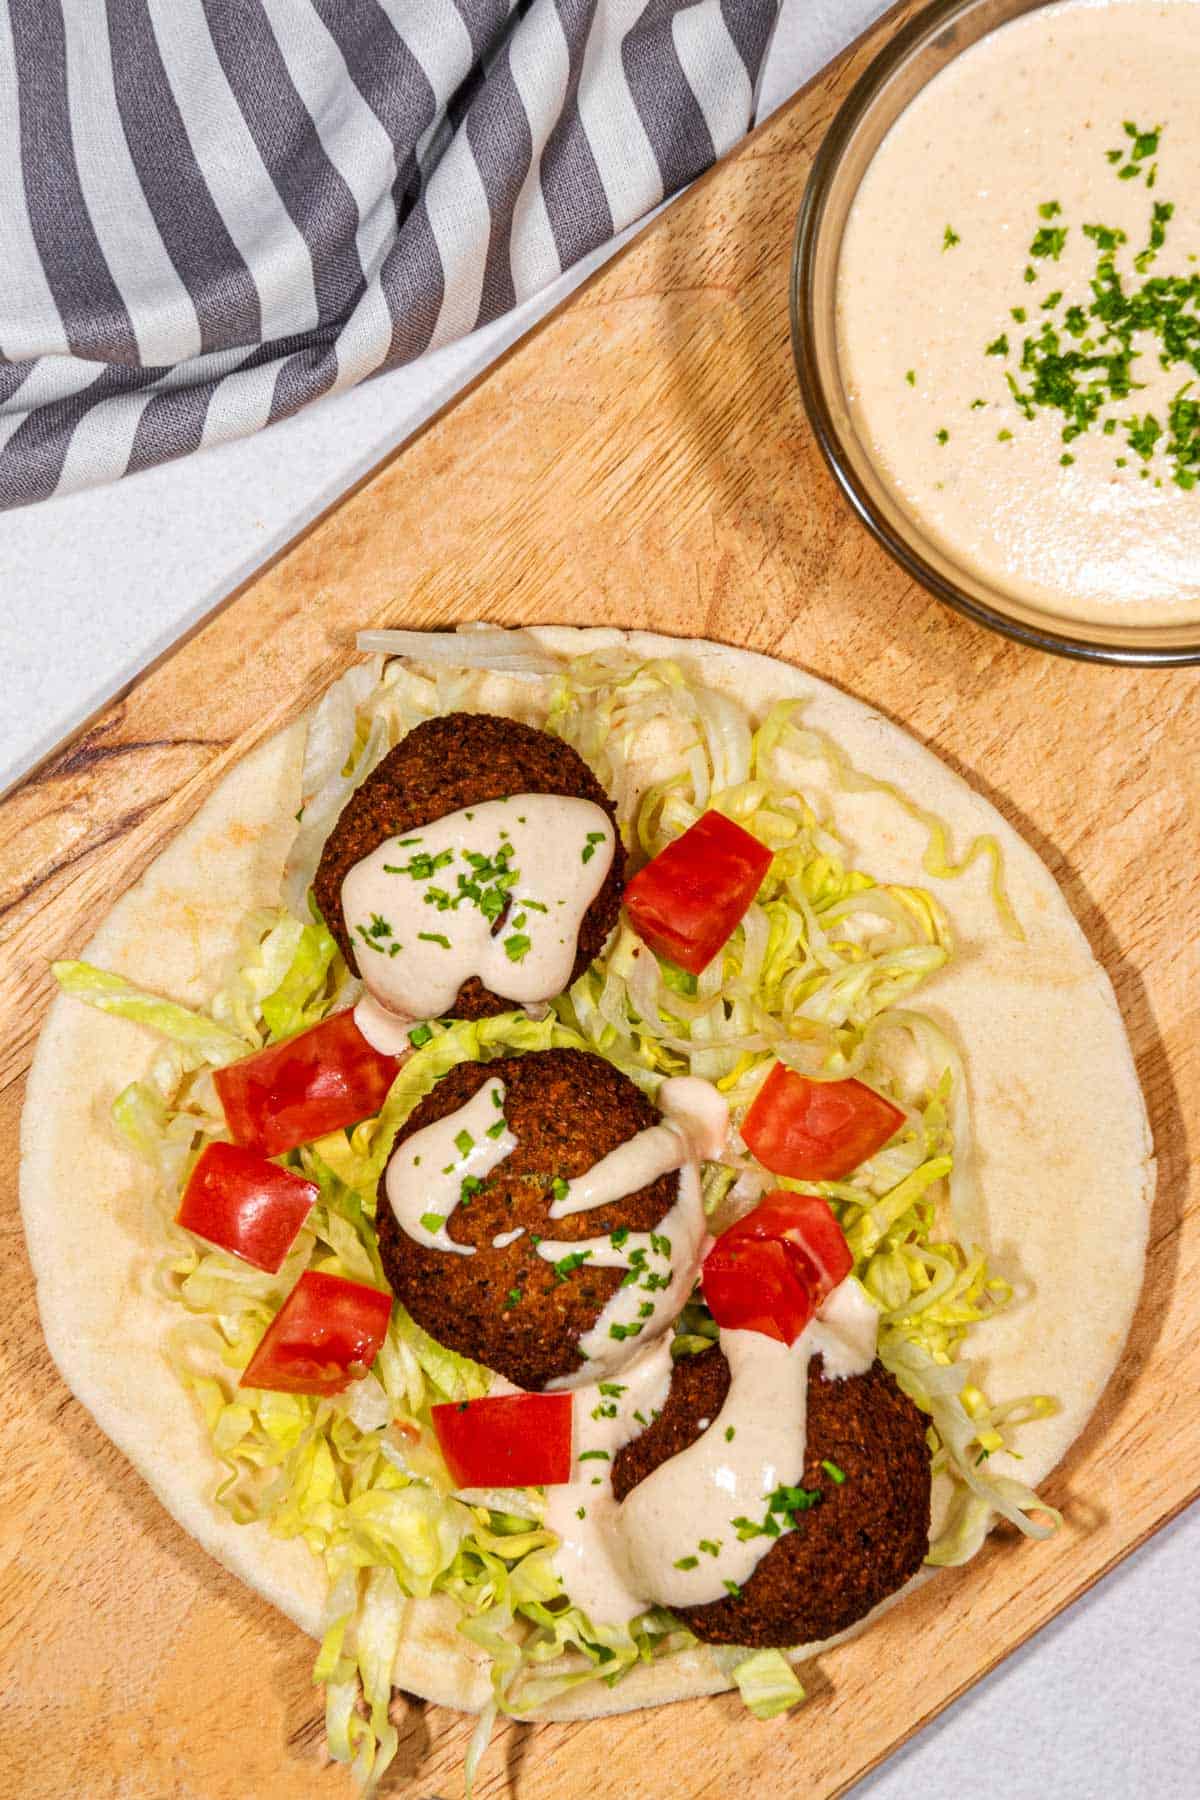 Vegan Falafel on a pita with shredded lettuce and diced tomatoes topped with tahini sauce.